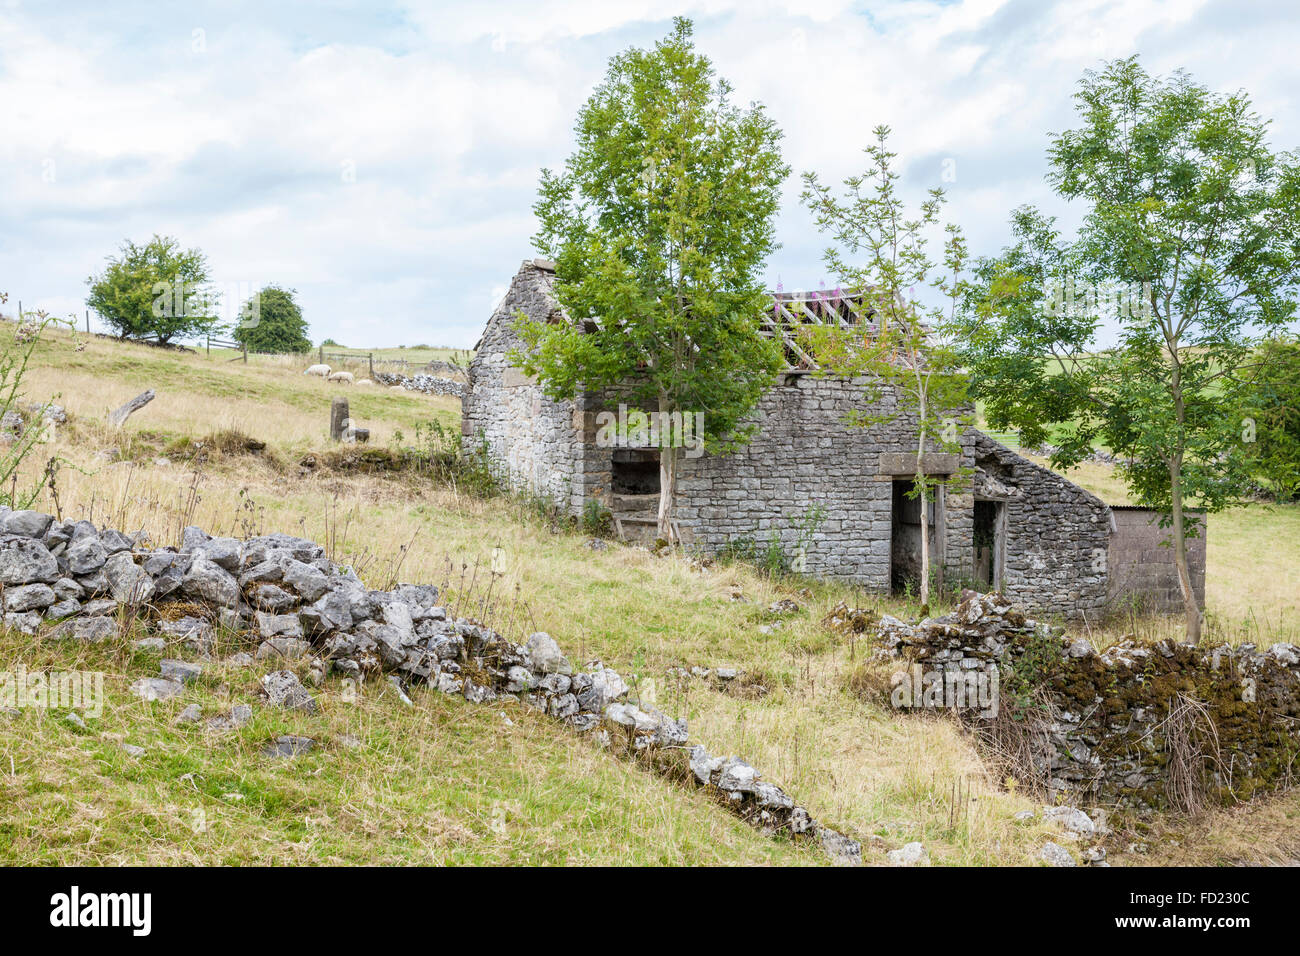 Abandoned ruin. Disused old stone farm building in ruins on a hillside field, Derbyshire, England, UK Stock Photo